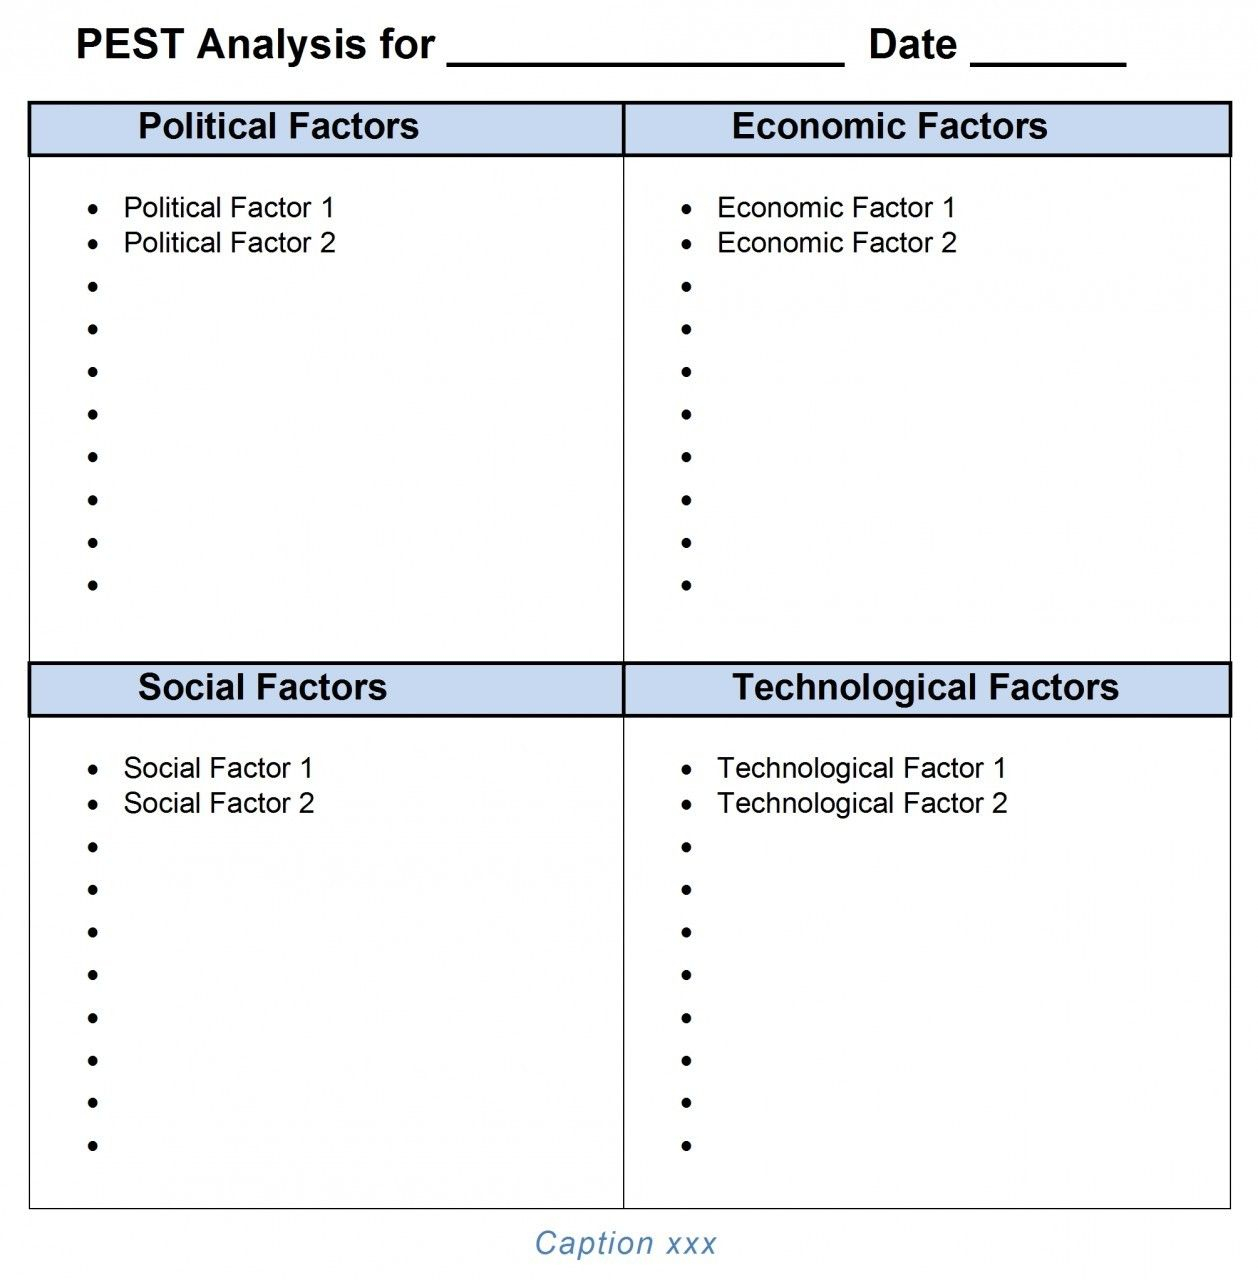 Pest Analysis Ms Word Template | It | Words, Templates Intended For Pestel Analysis Template Word